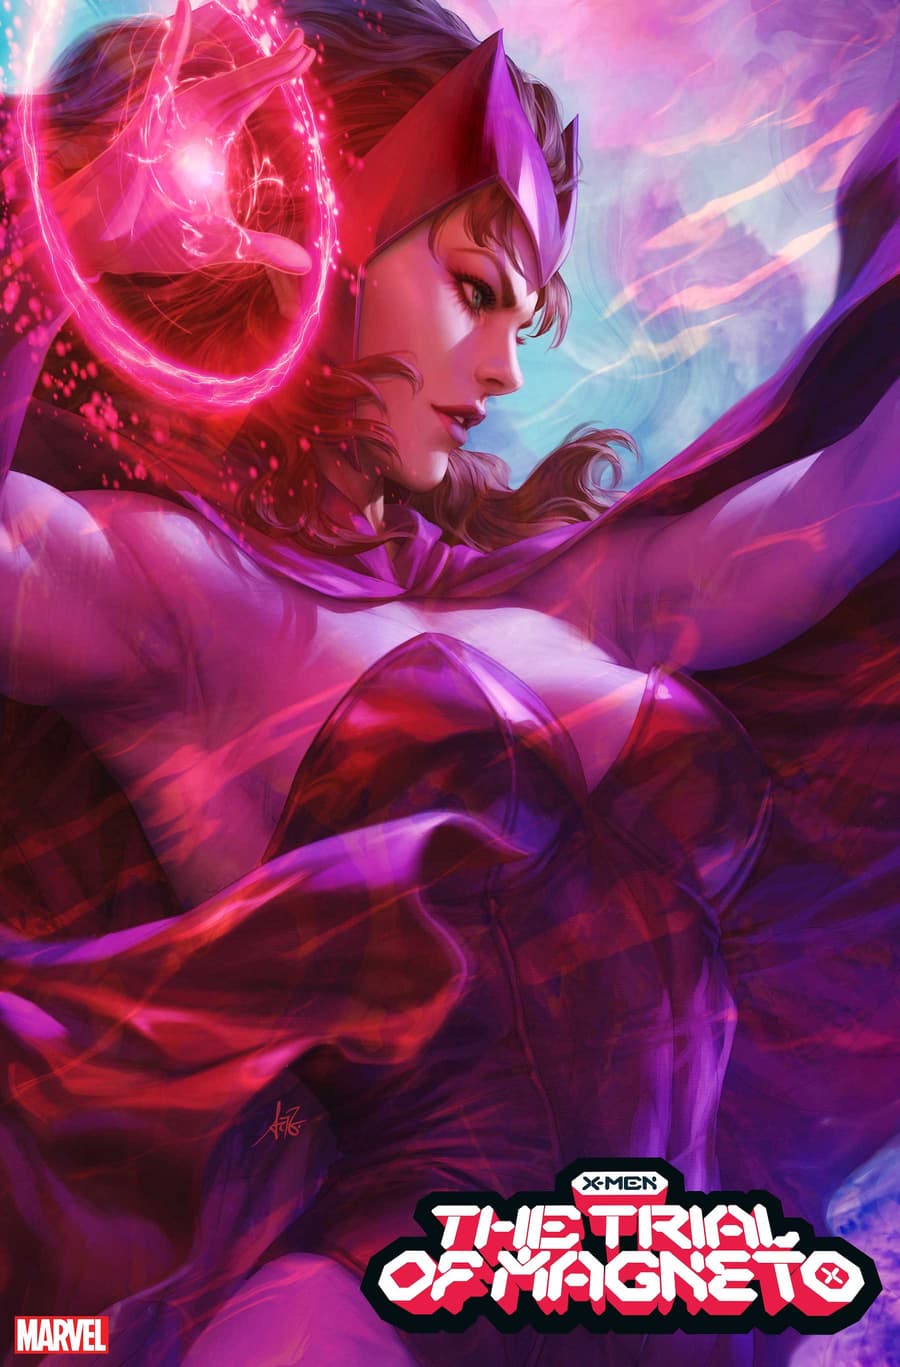 X-MEN: THE TRIAL OF MAGNETO #1 variant cover by Stanley “Artgerm” Lau